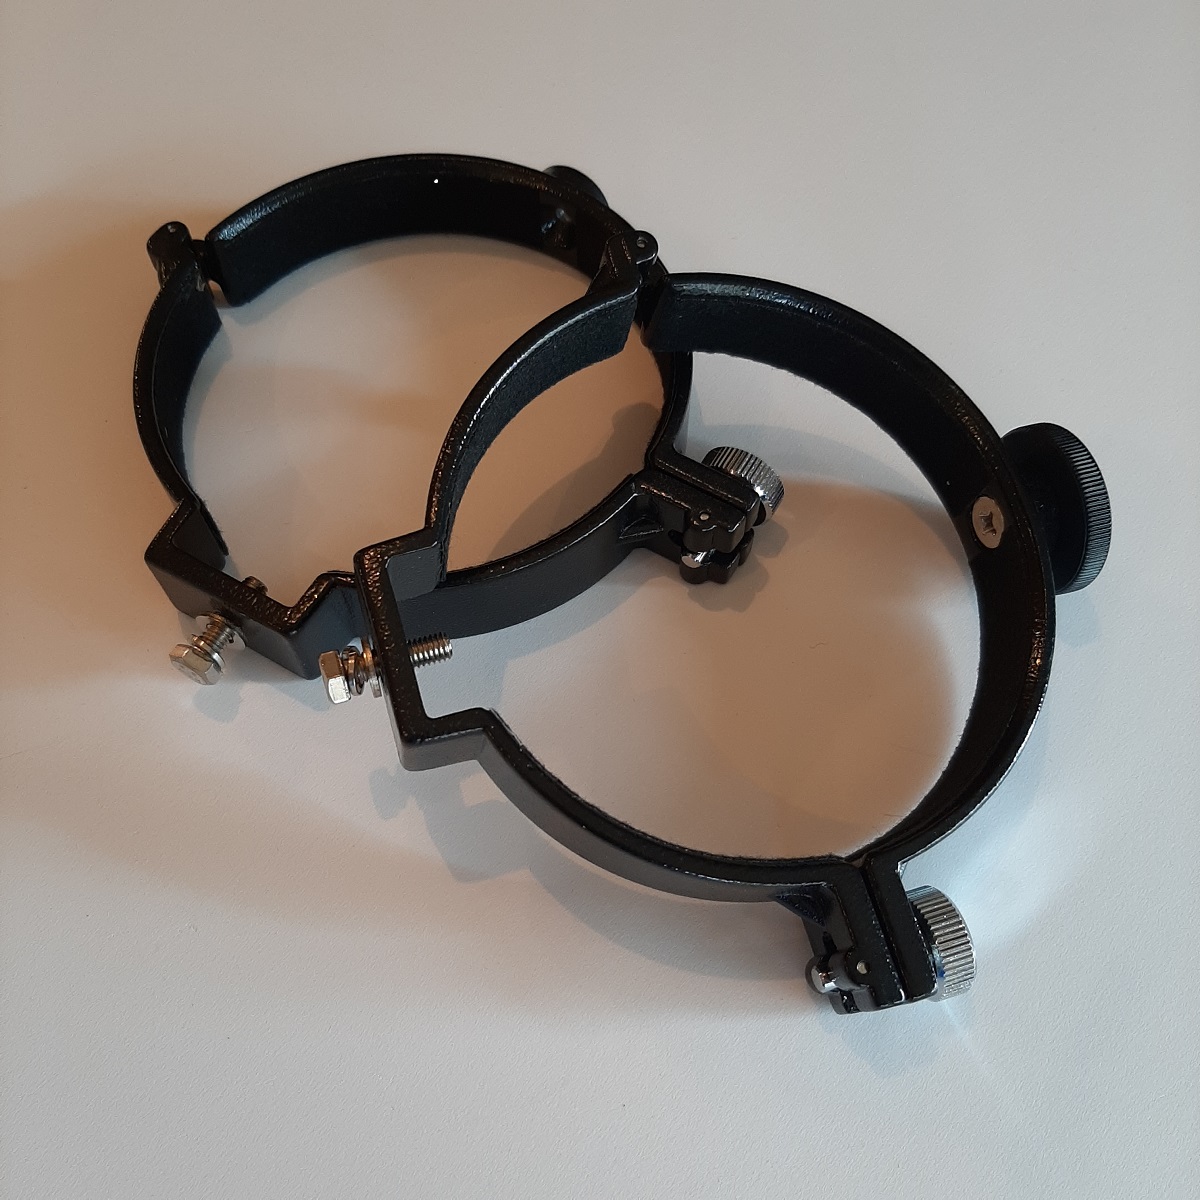 Orion - 116mm tube rings NEVER USED - CN Classifieds - Cloudy Nights Telescope 116 Mm Tube Rings